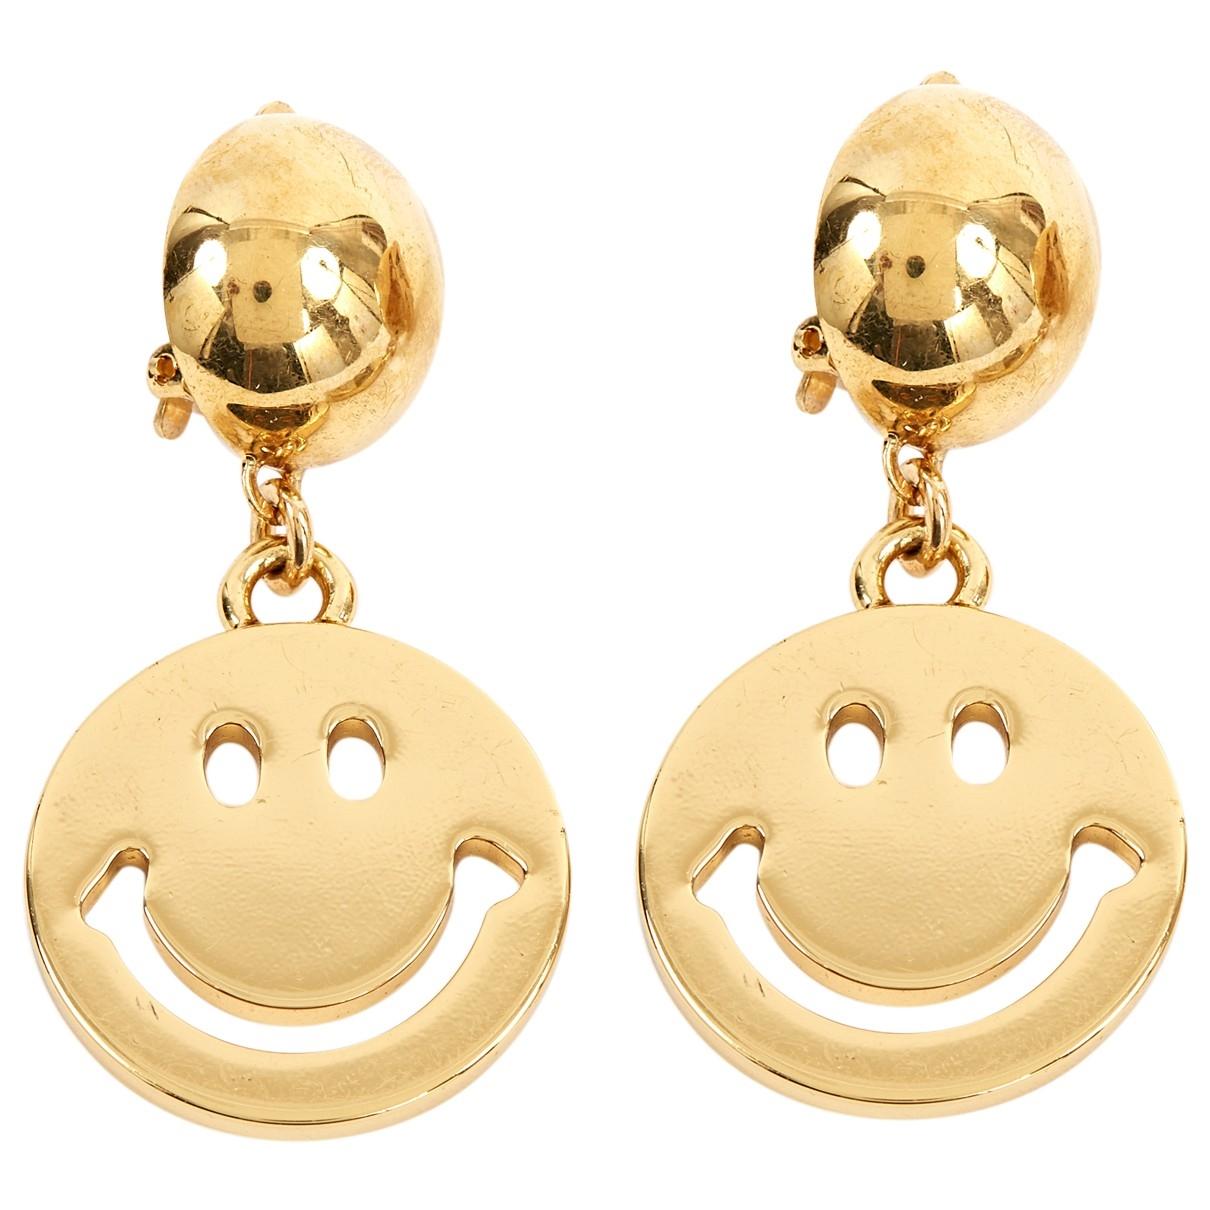 Lyst - Moschino Pre-owned Gold Metal Earrings in Metallic